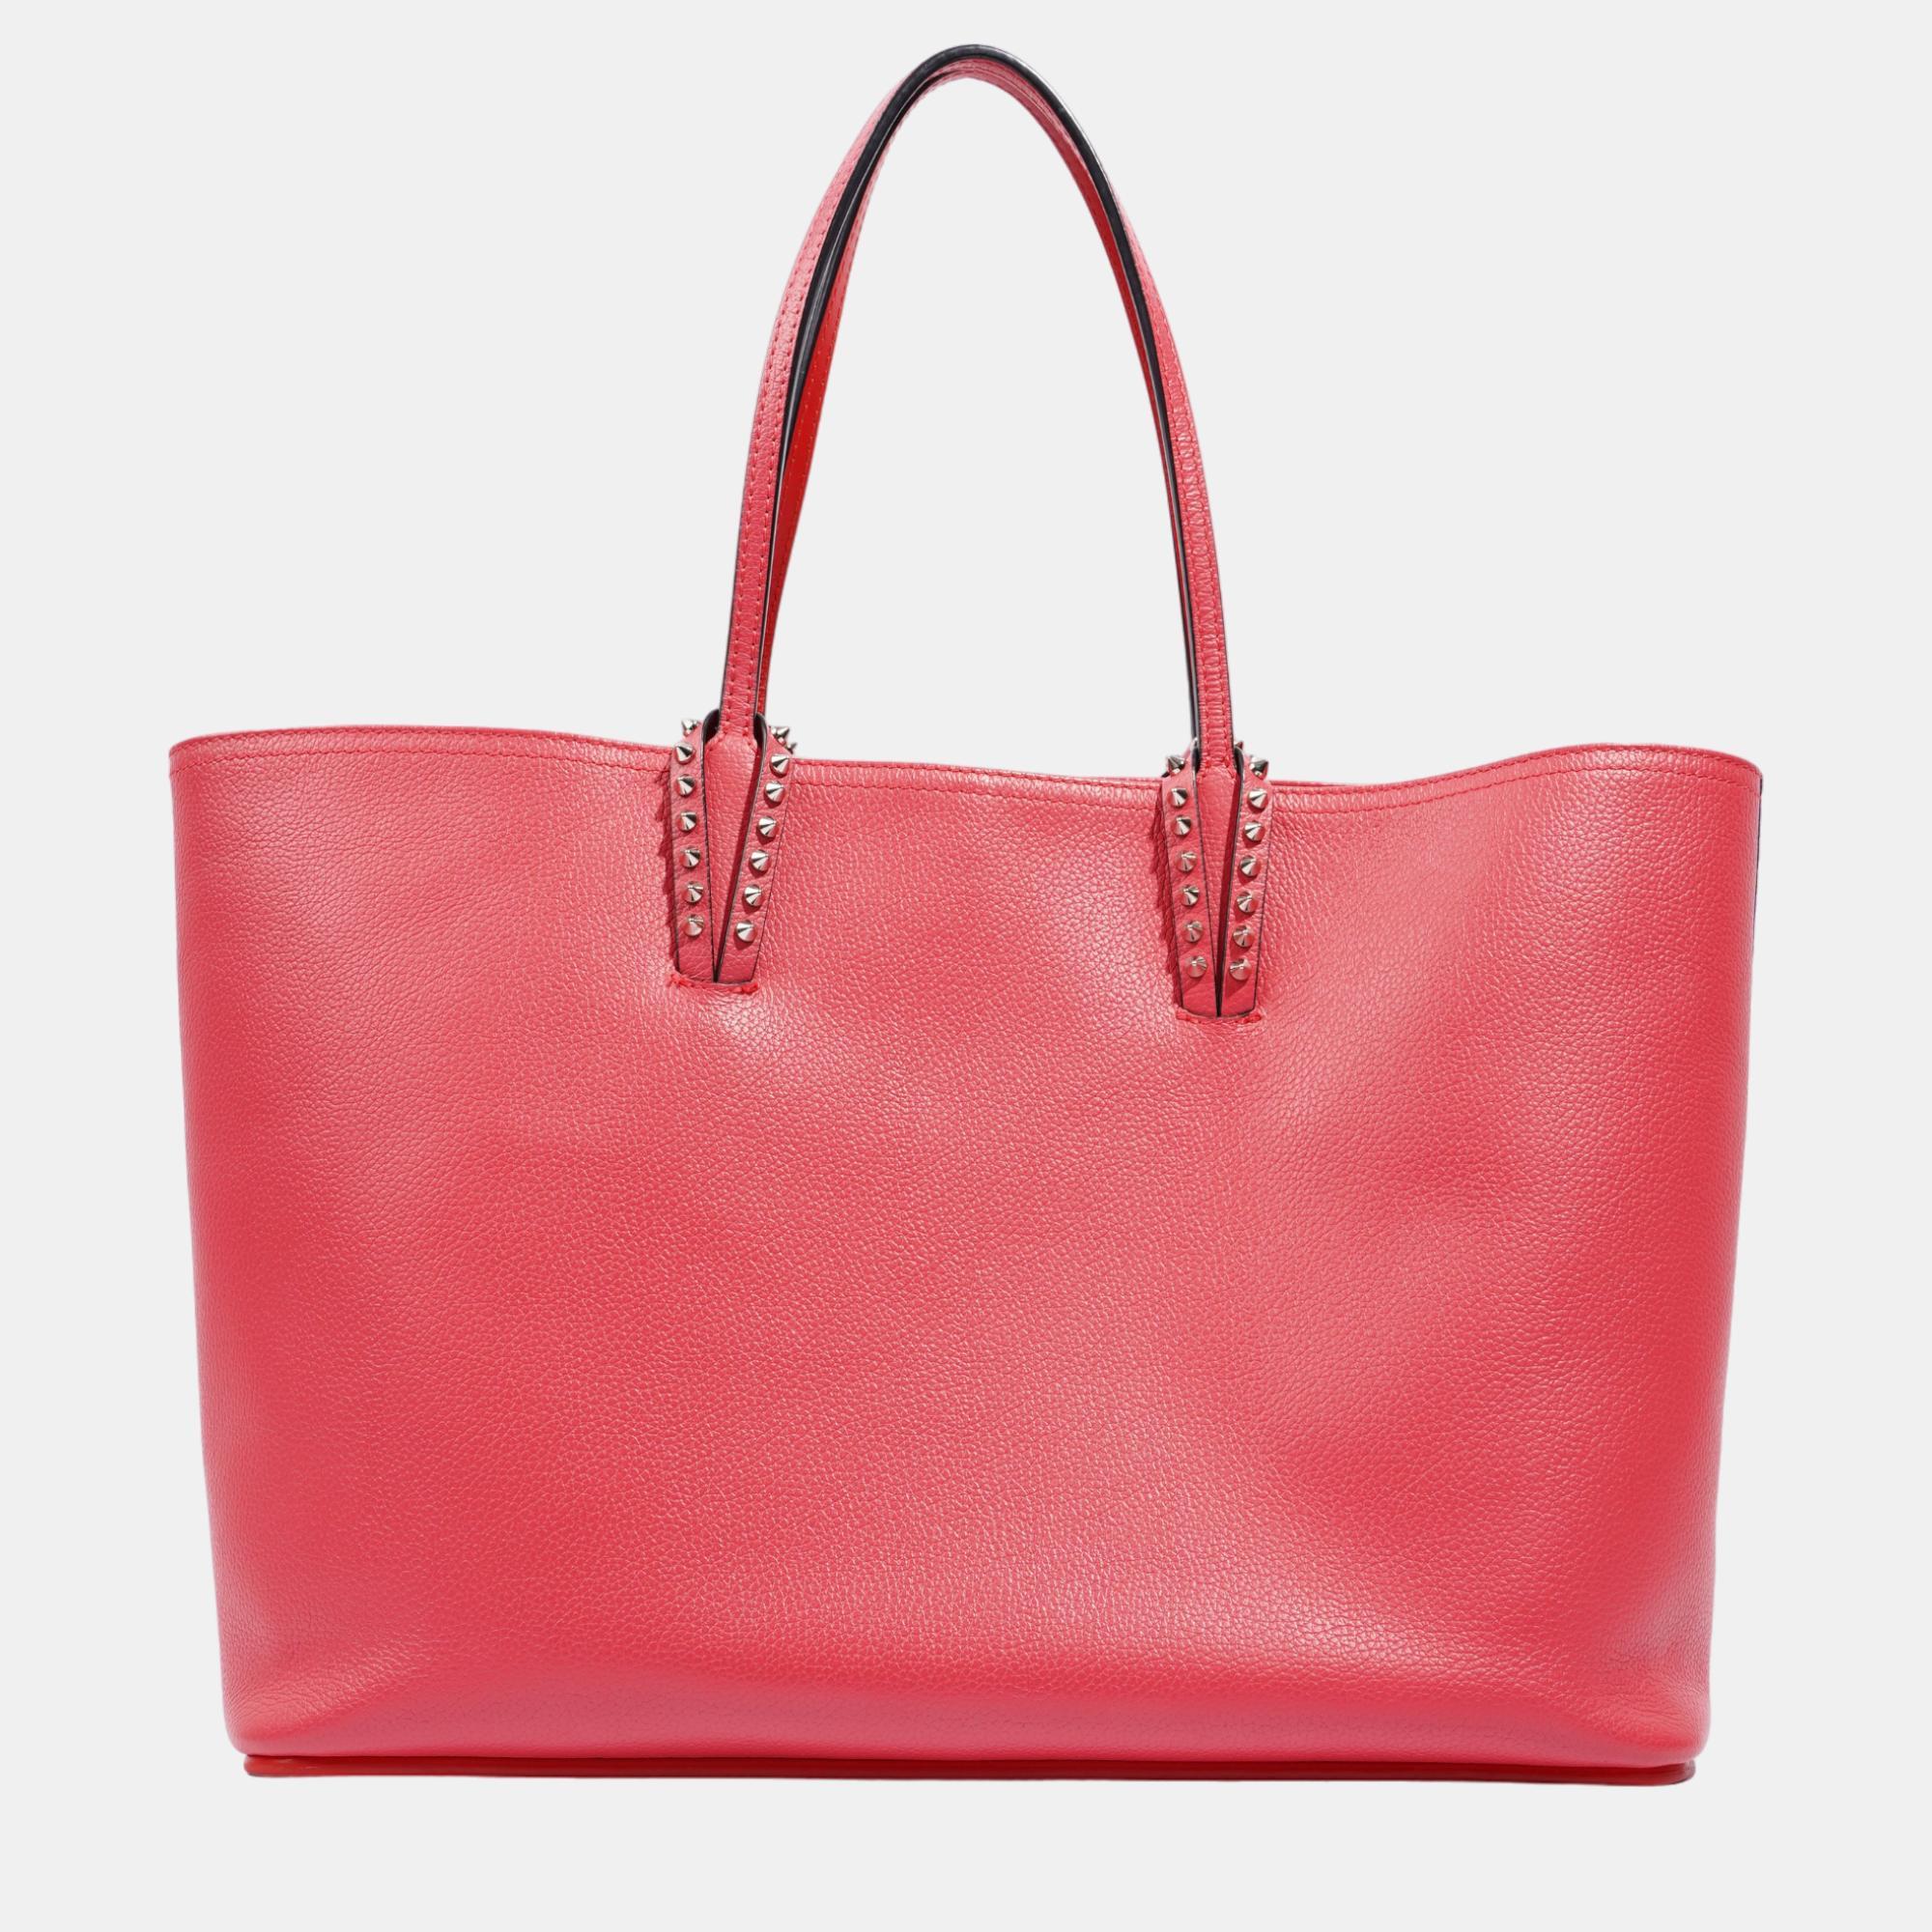 Christian Louboutin Cabas Tote Bag Pink Leather